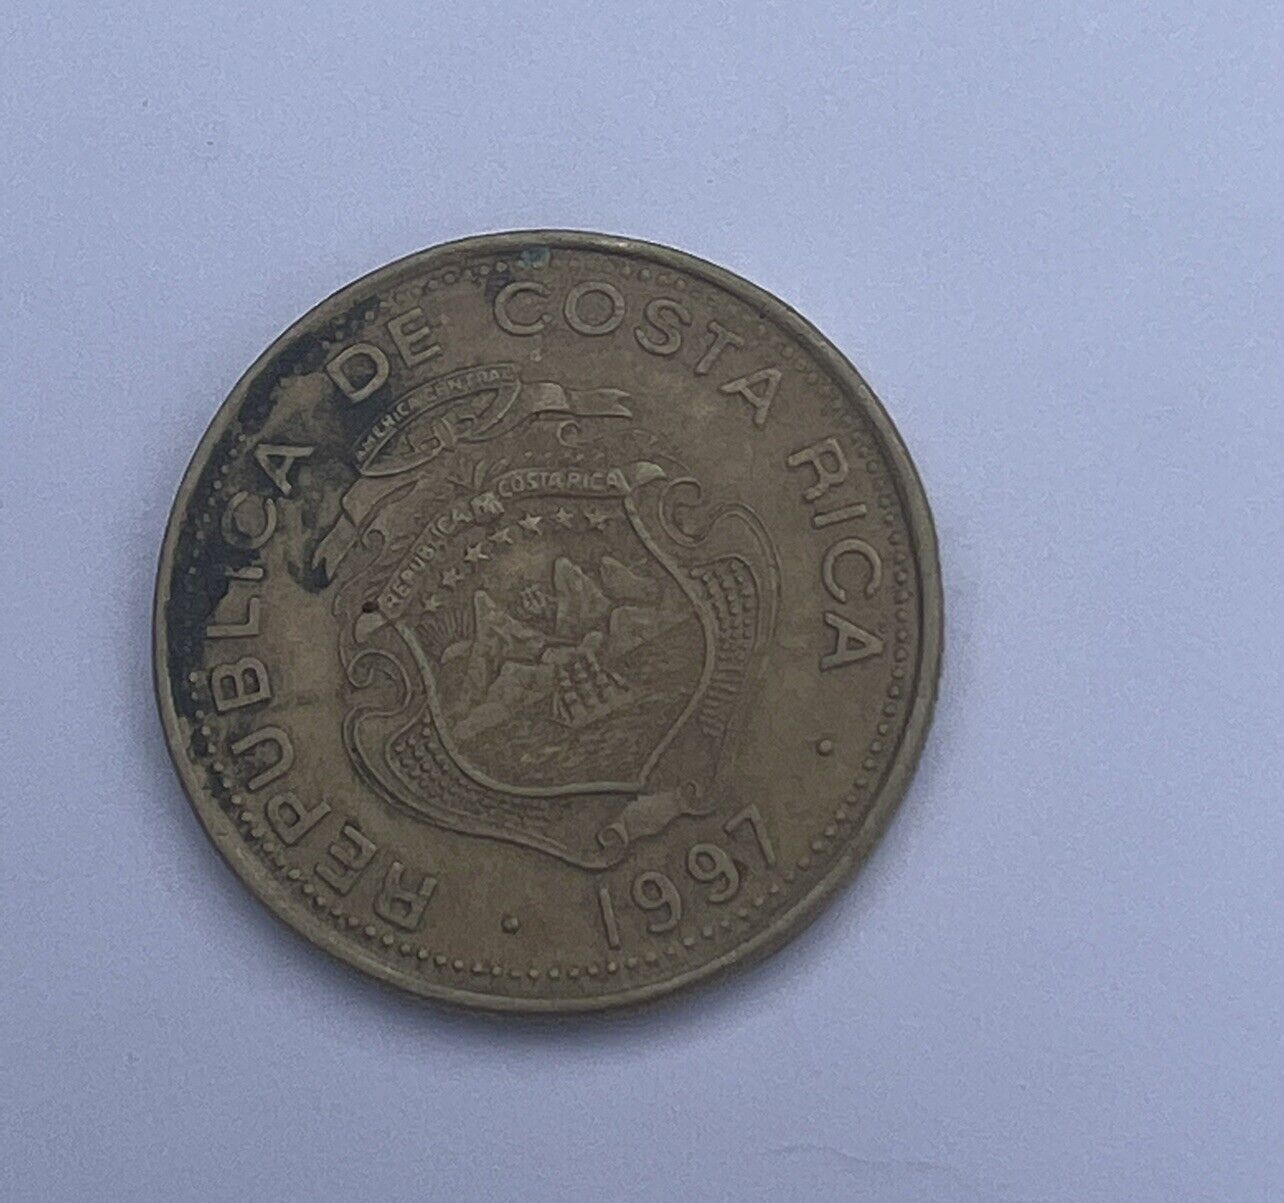 Costa Rica Km231 1997 Vf-very Fine-nice Large Circulated Old 50 Colones Coin